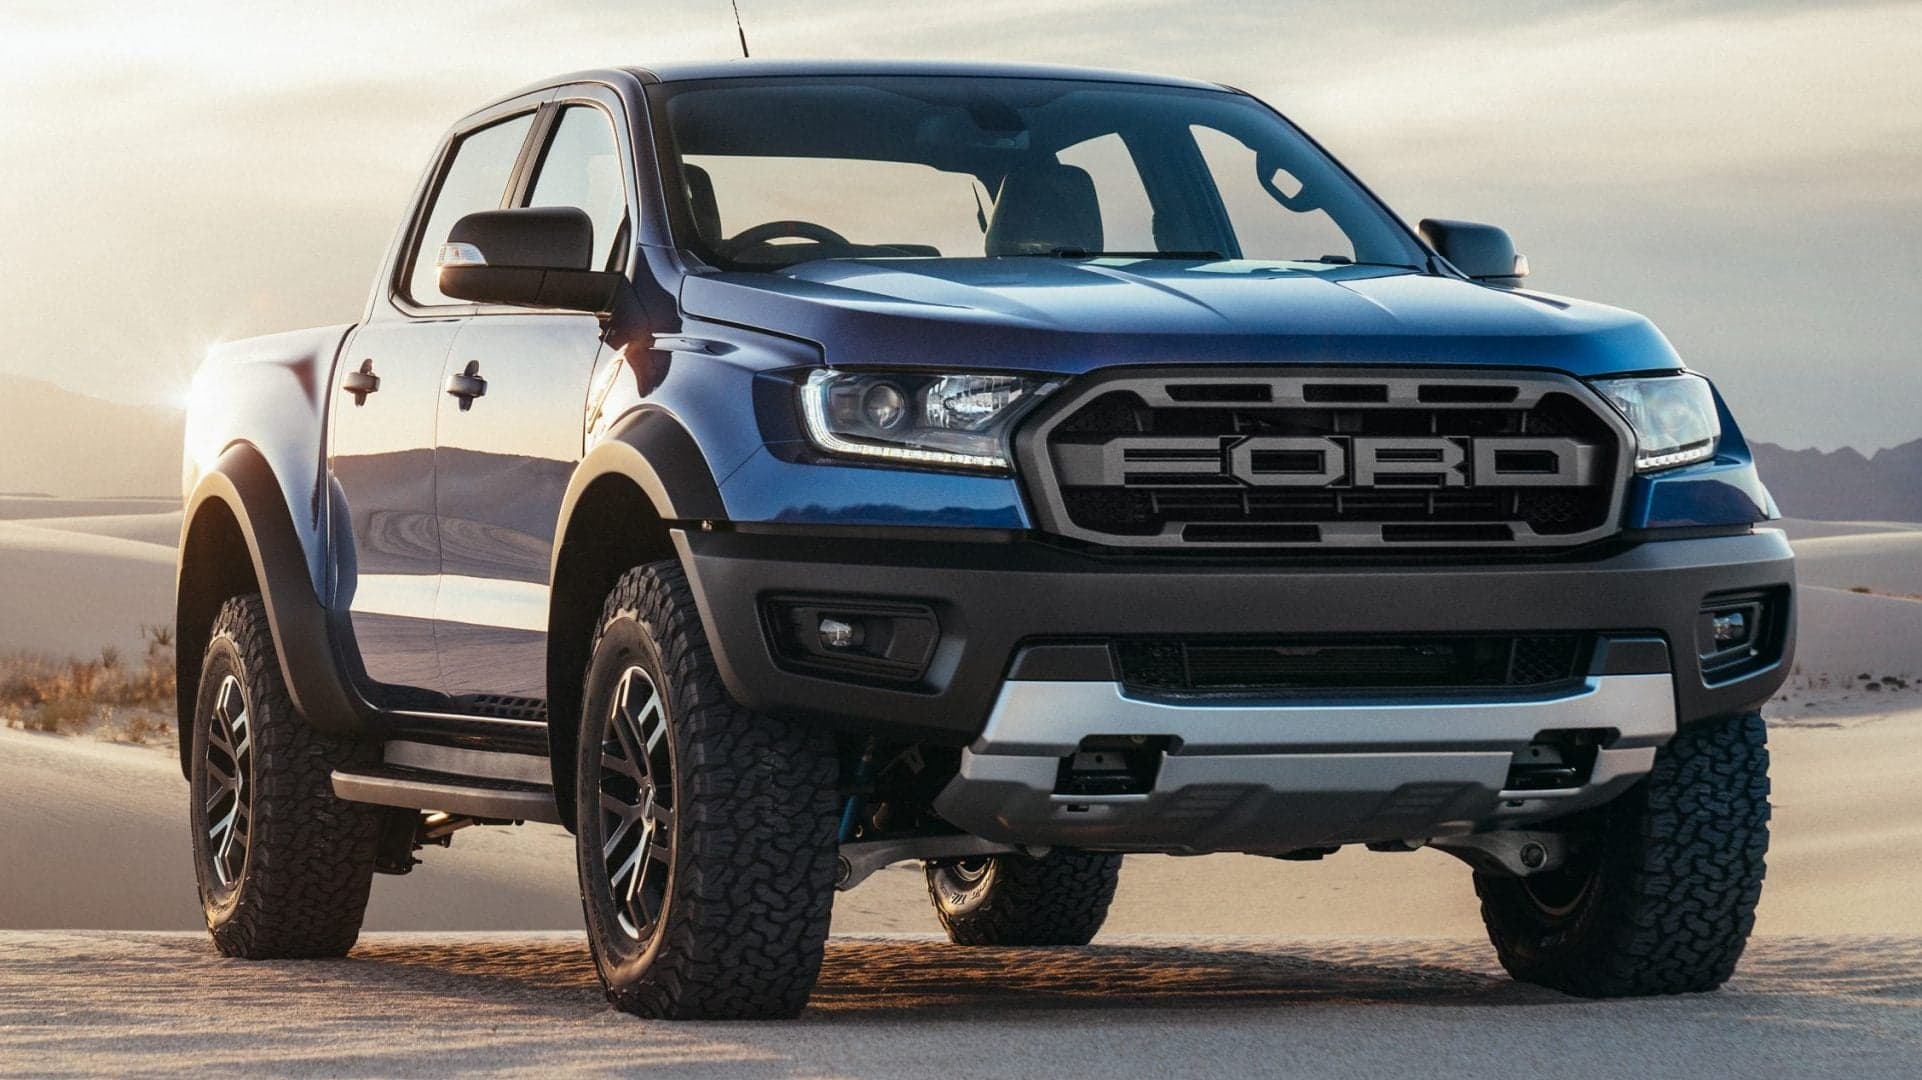 The Ford Ranger Raptor Is Real…But Is It Coming to America?